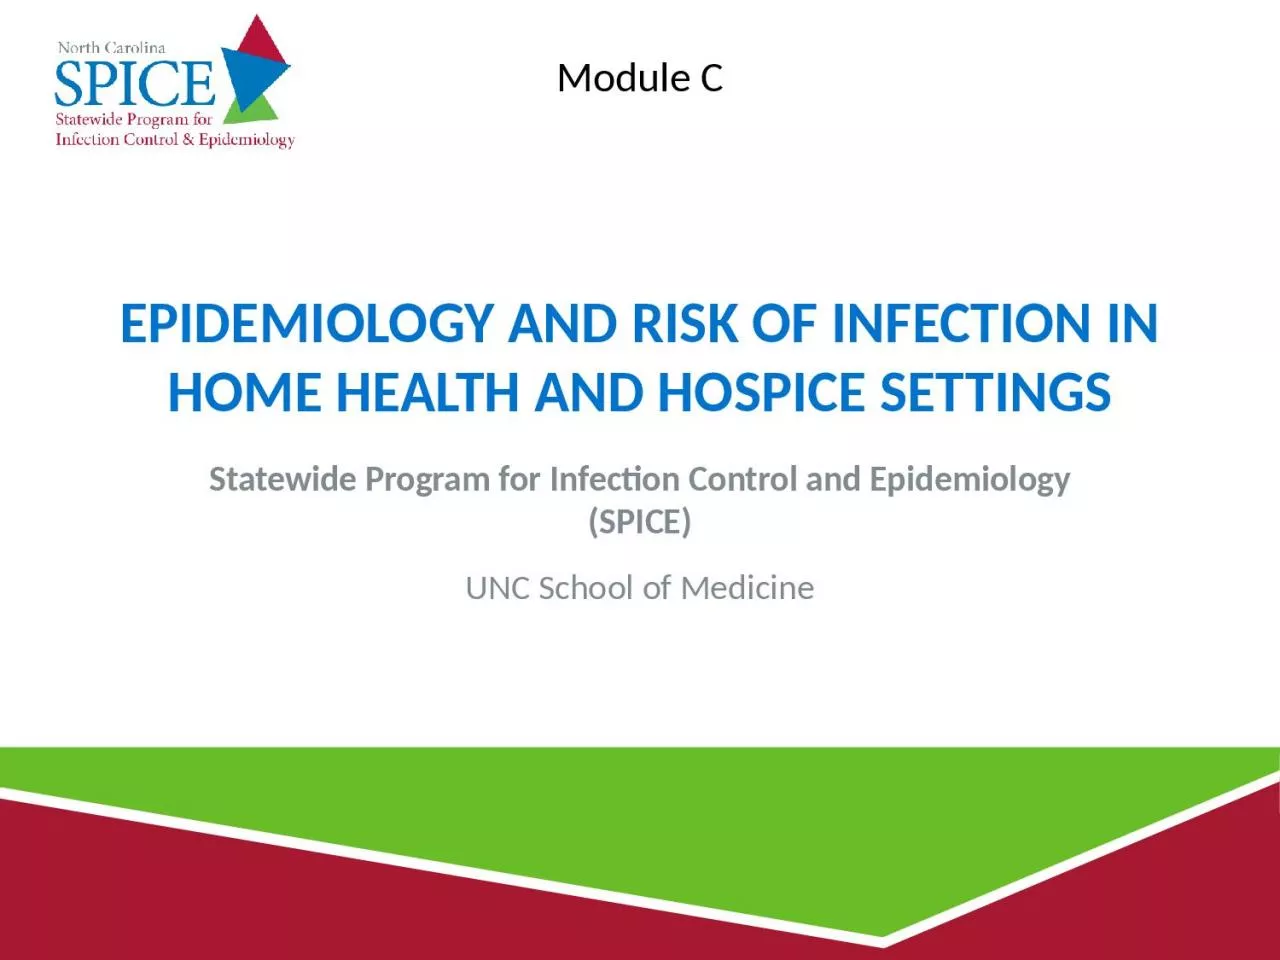 Epidemiology and Risk of Infection in Home Health and Hospice Settings